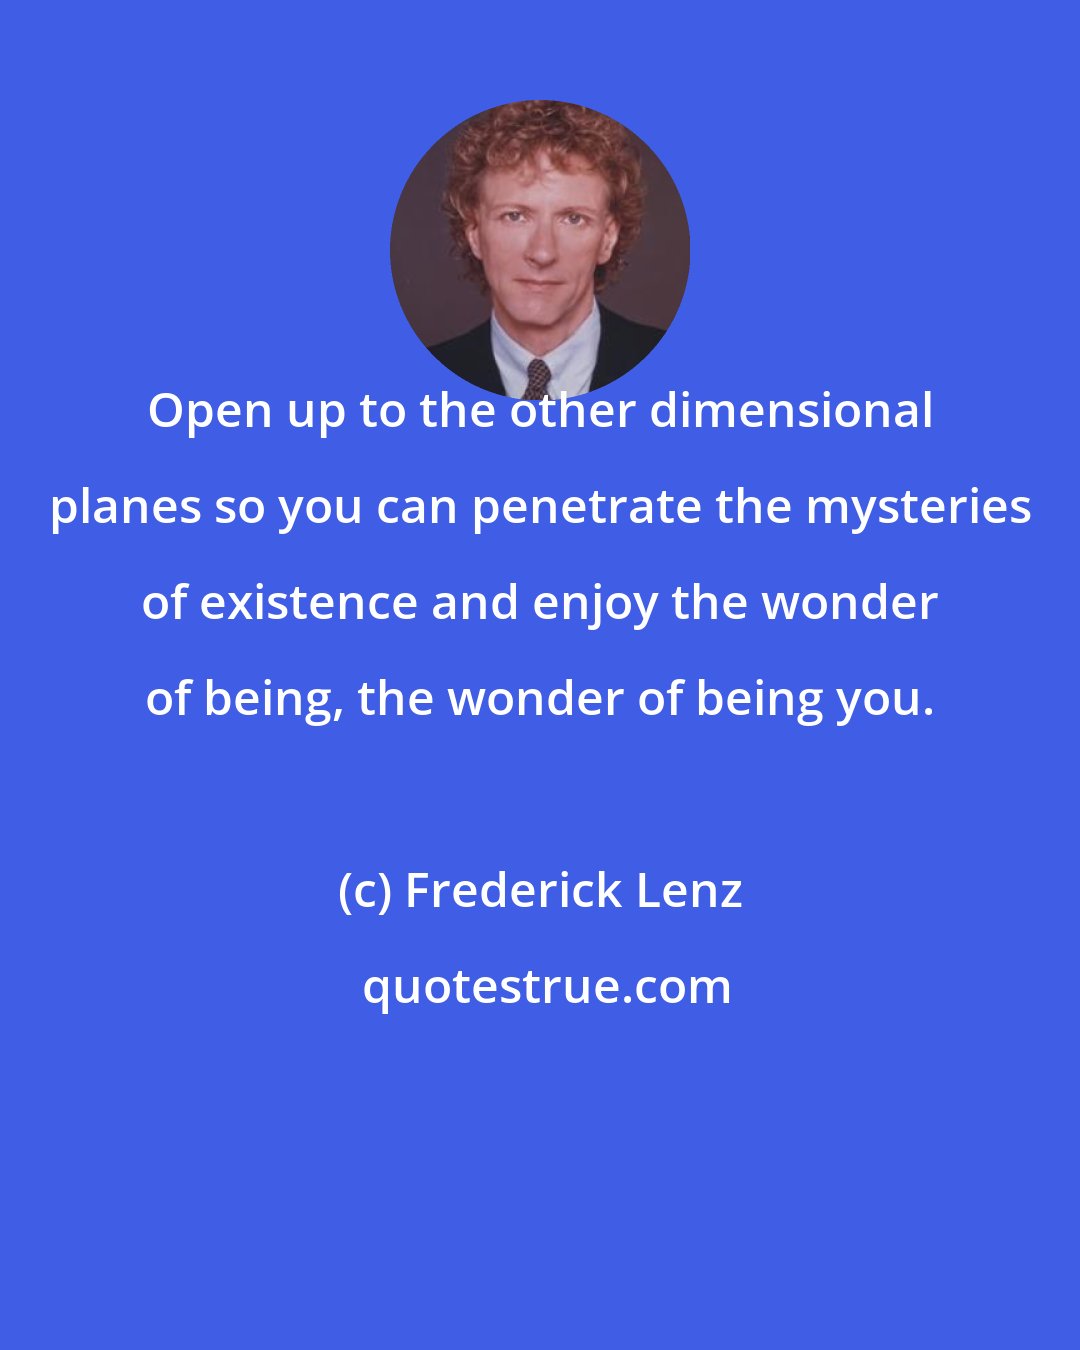 Frederick Lenz: Open up to the other dimensional planes so you can penetrate the mysteries of existence and enjoy the wonder of being, the wonder of being you.